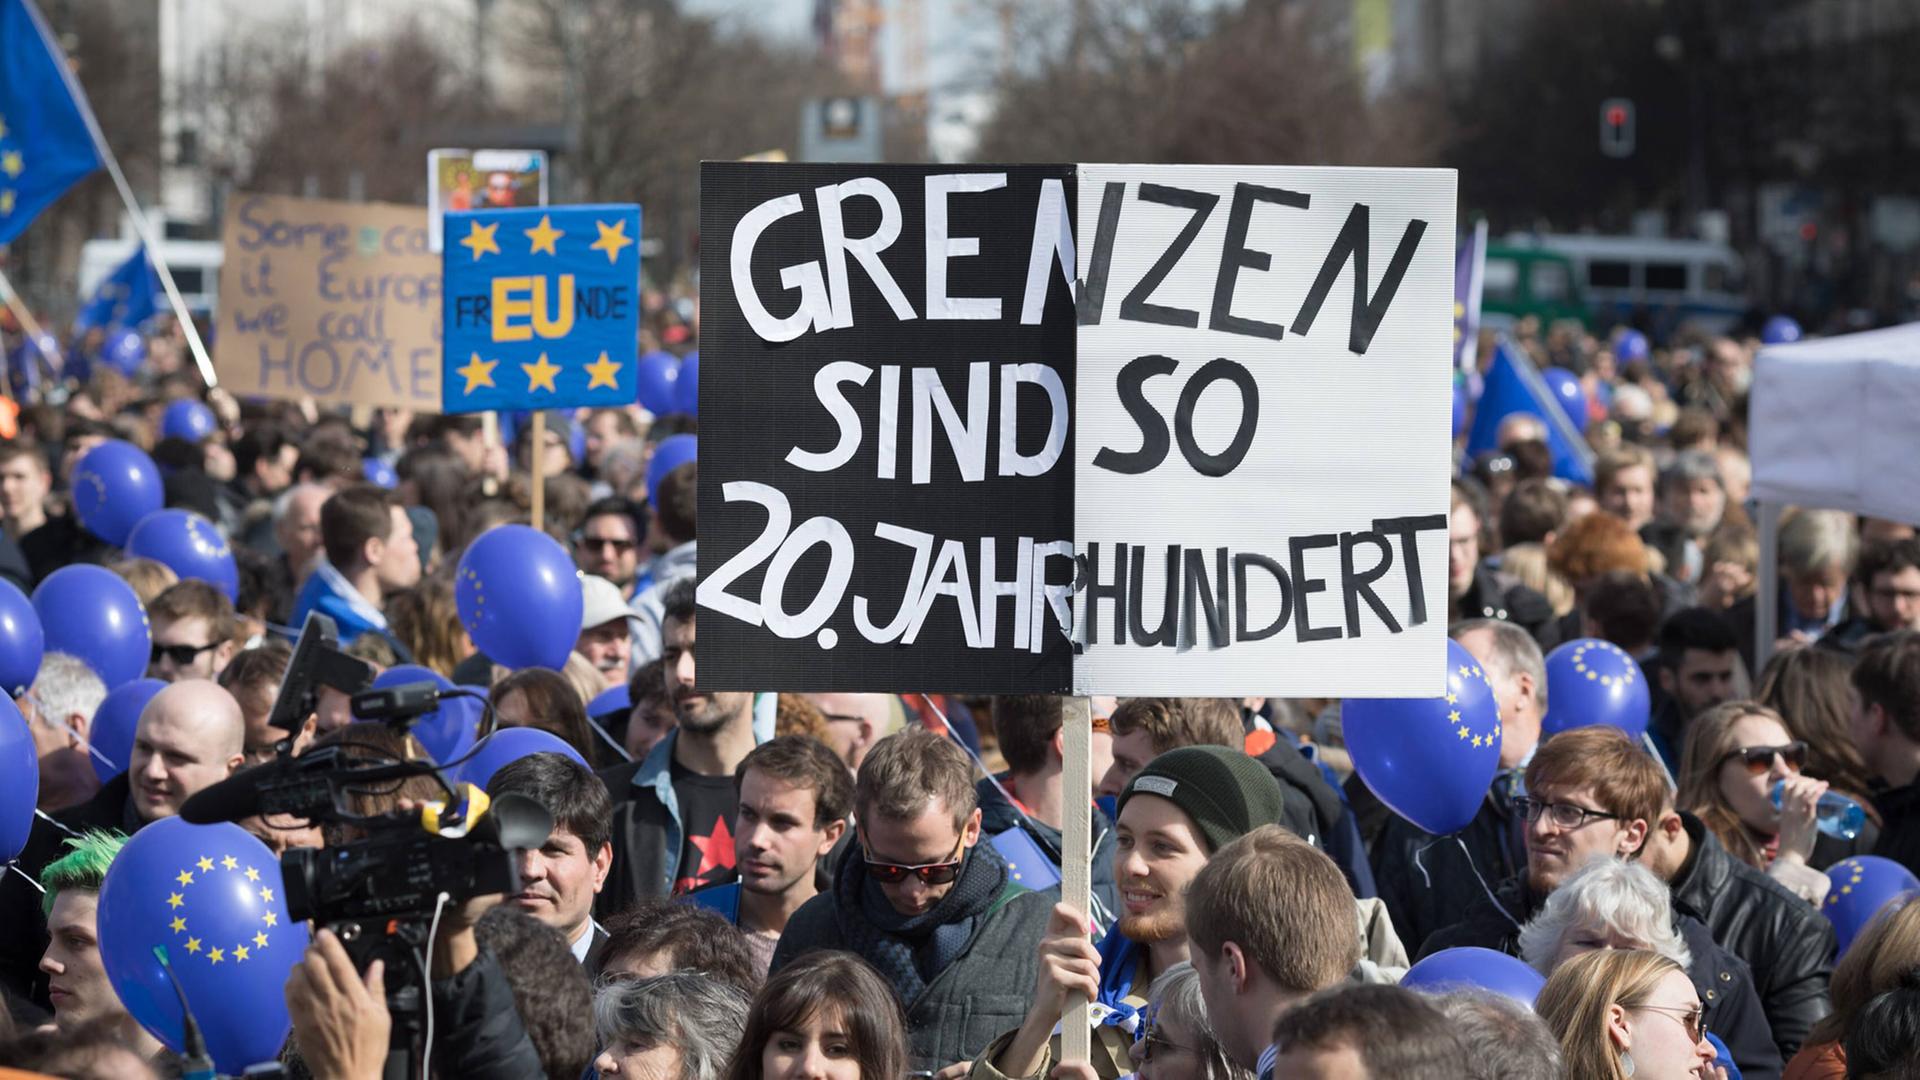 March for Europe in Berlin